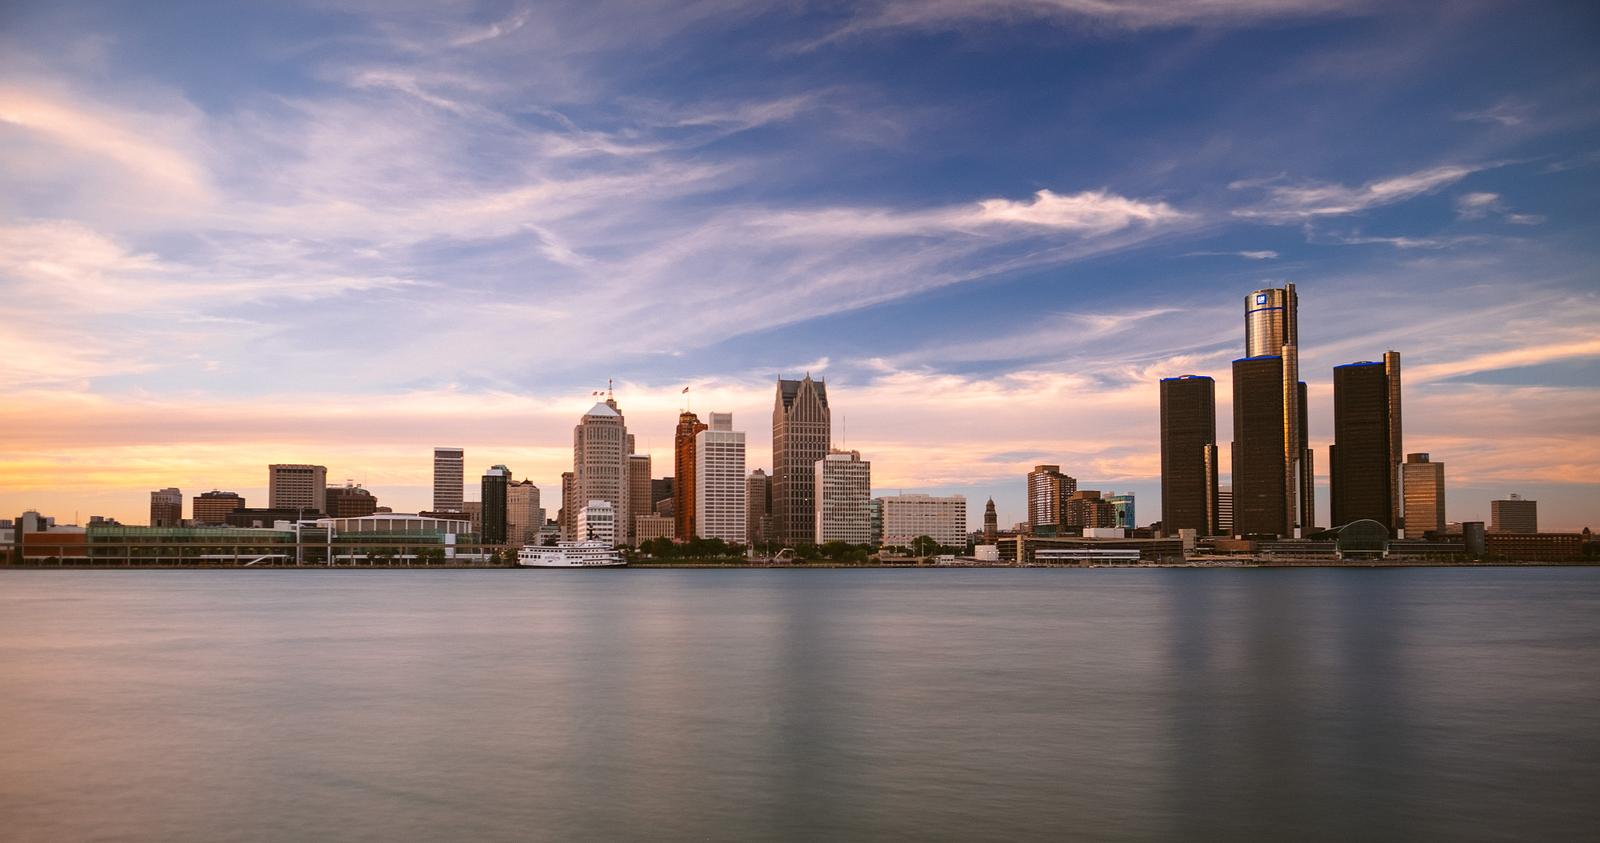 Name That City! Put Your Travel Knowledge to Test With This Picture Quiz! Detroit, Michigan